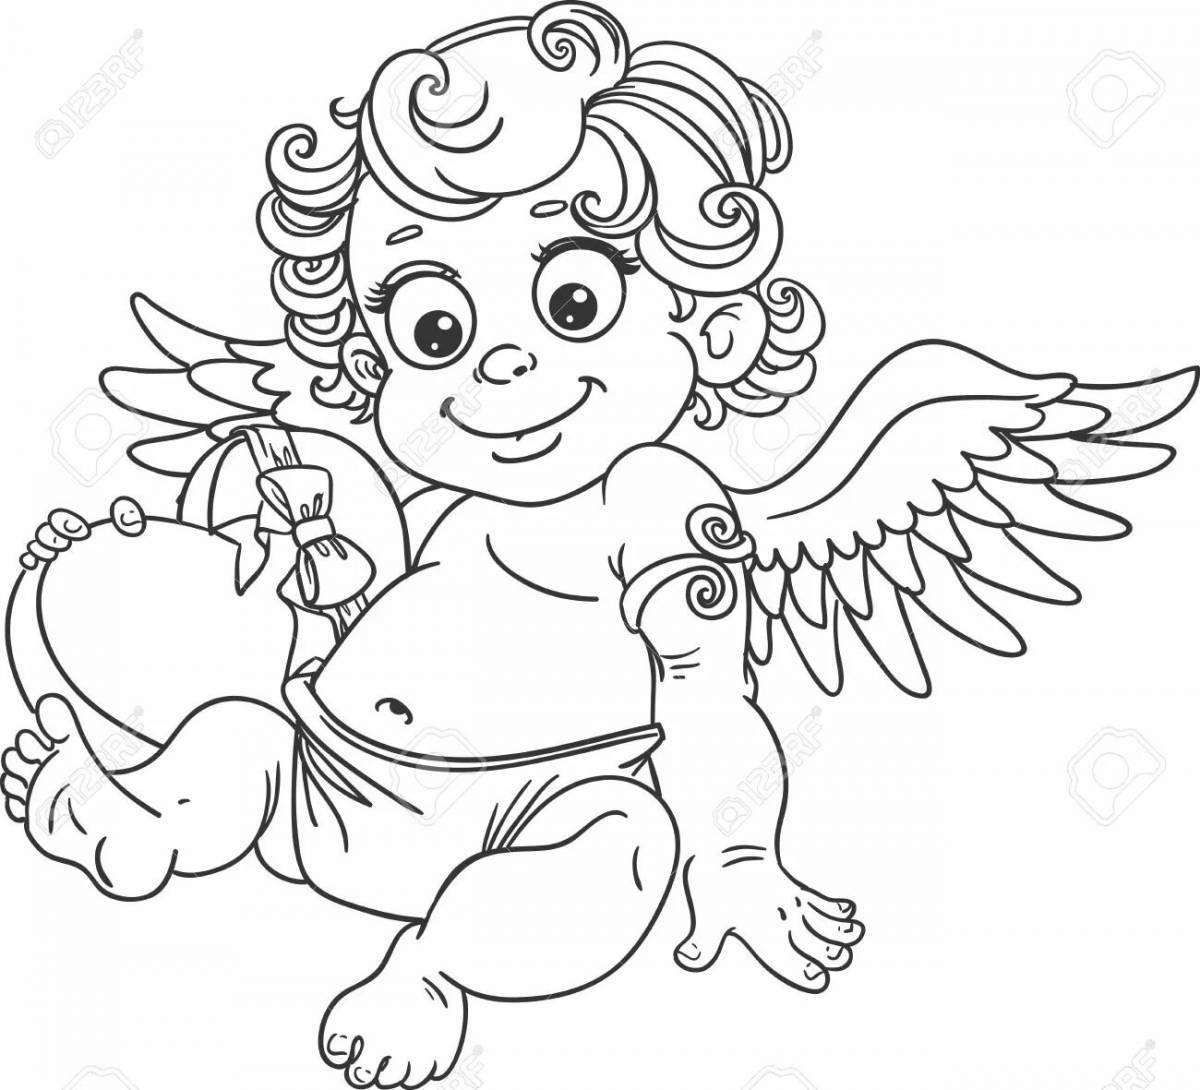 Coloring page dazzling cupid